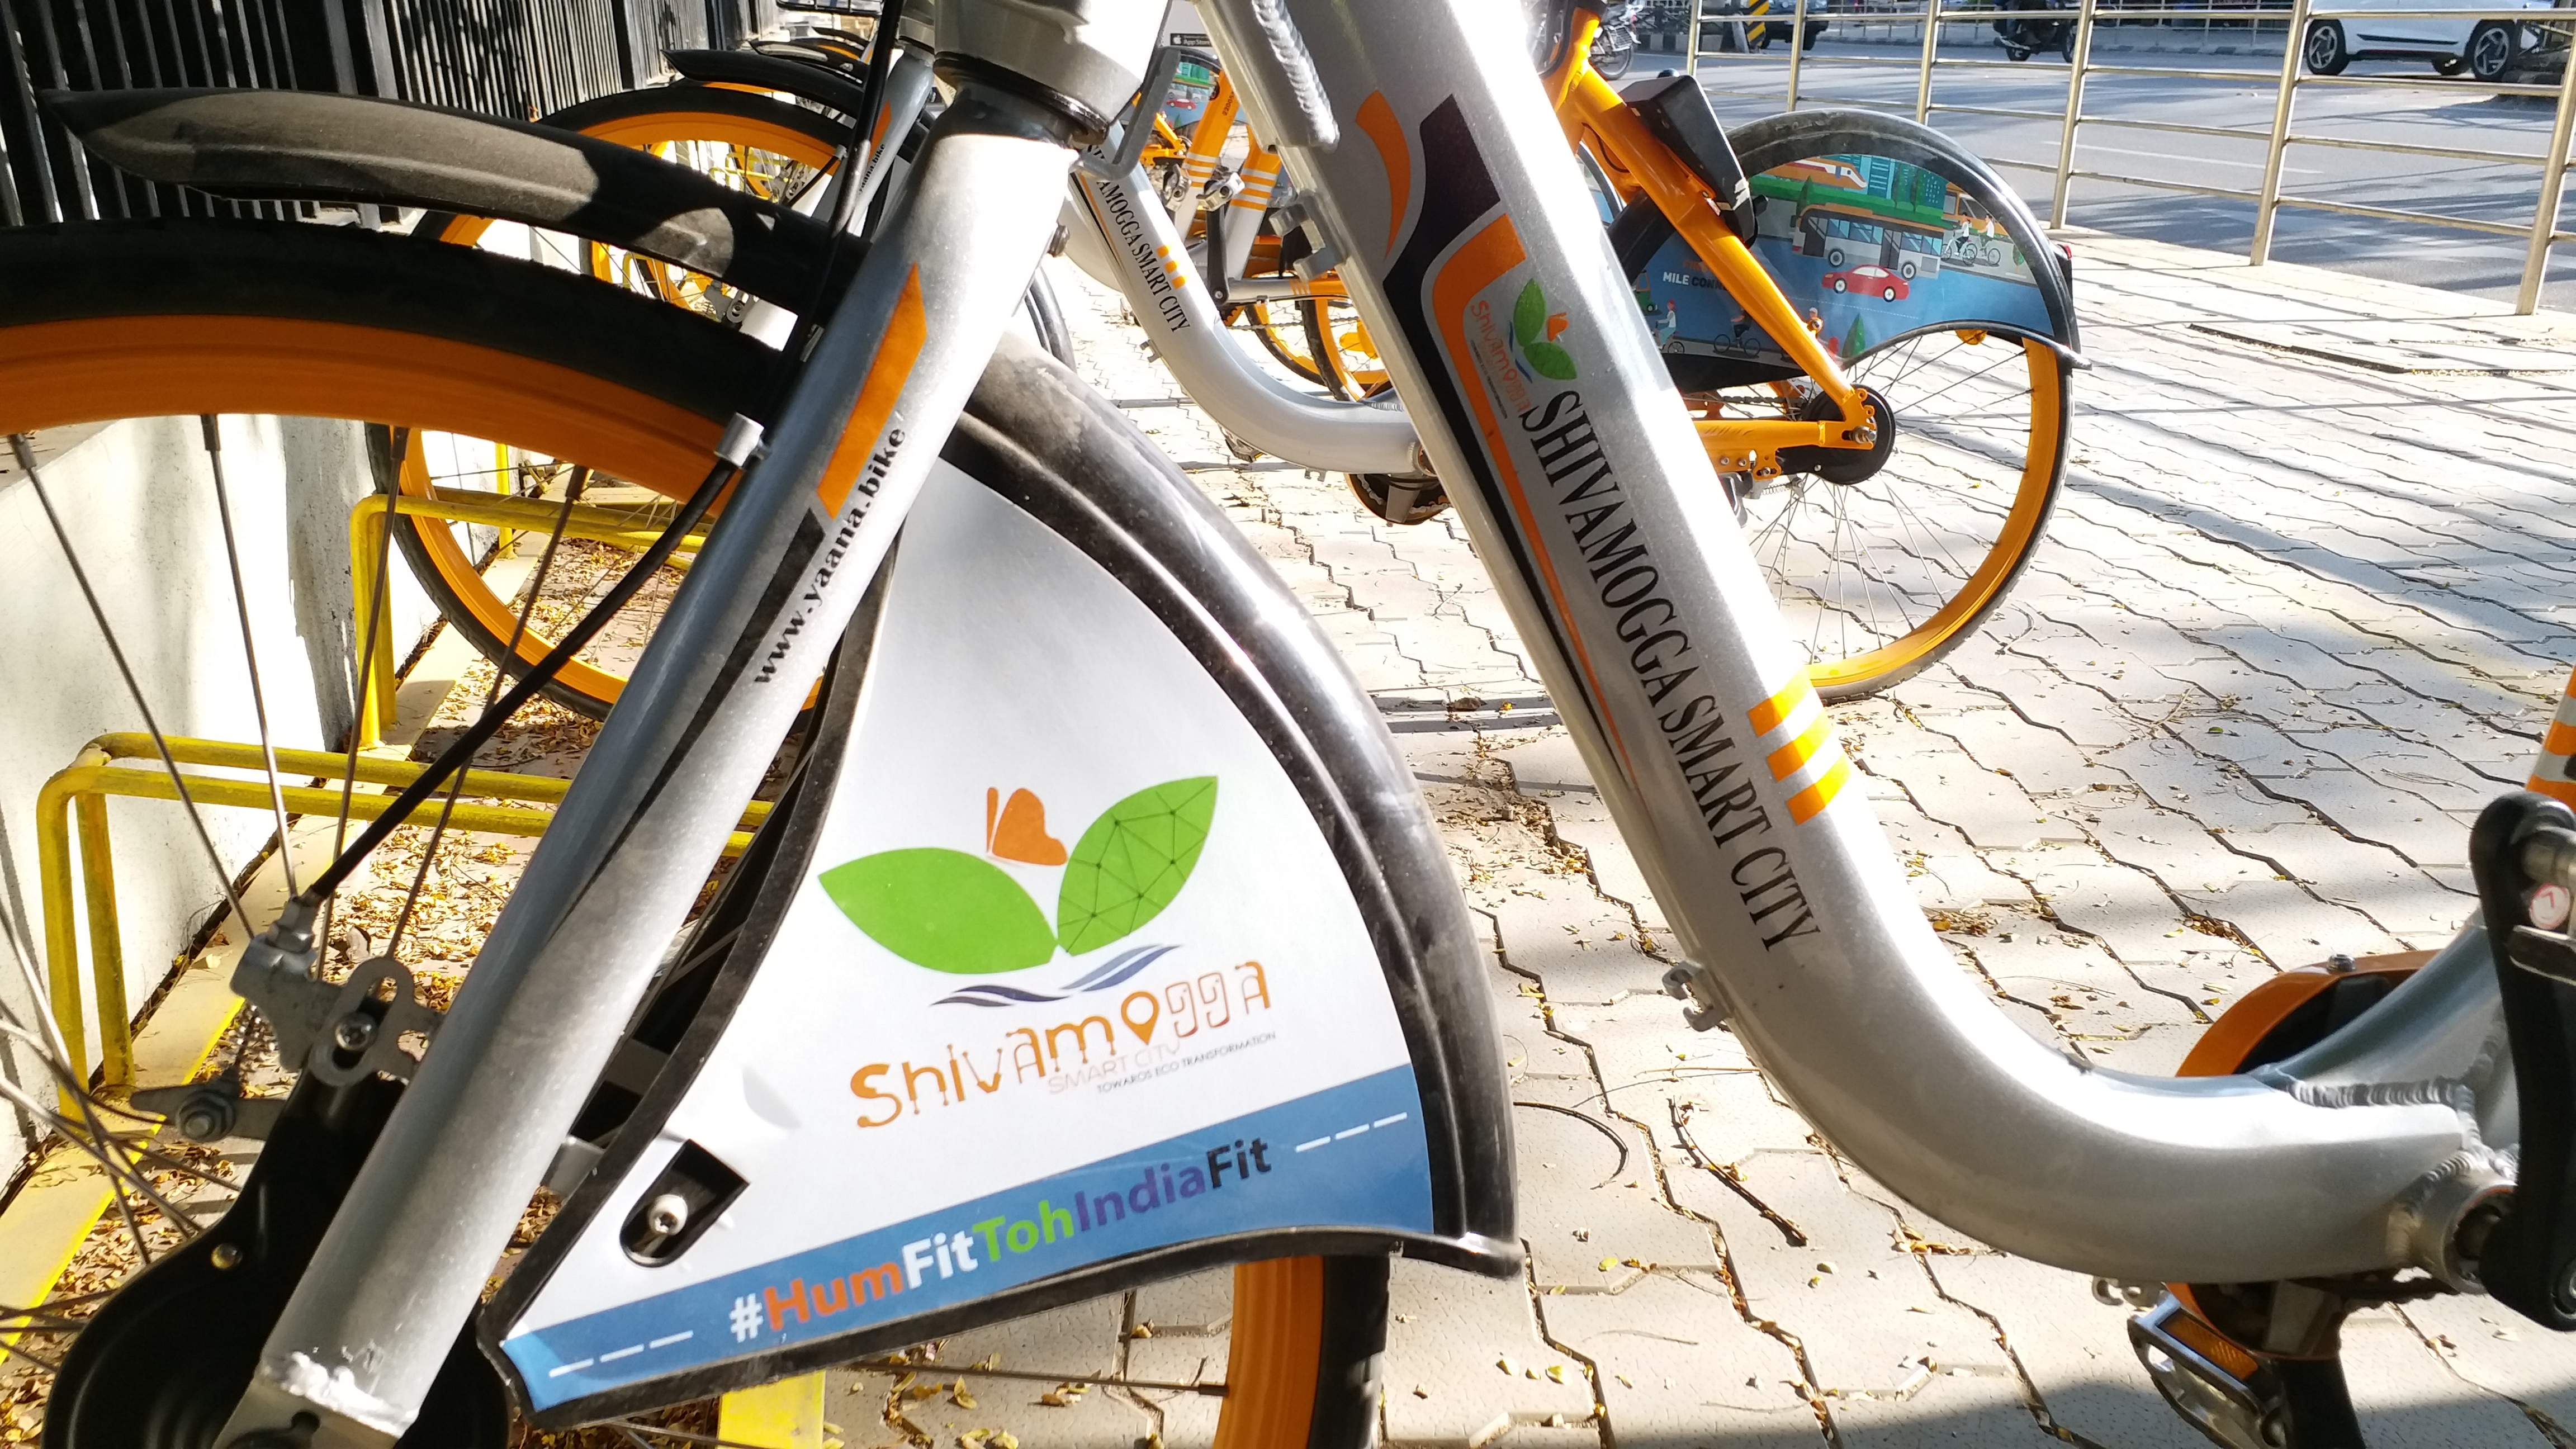 Smart city launches technology-based cycle service in Shivamogga